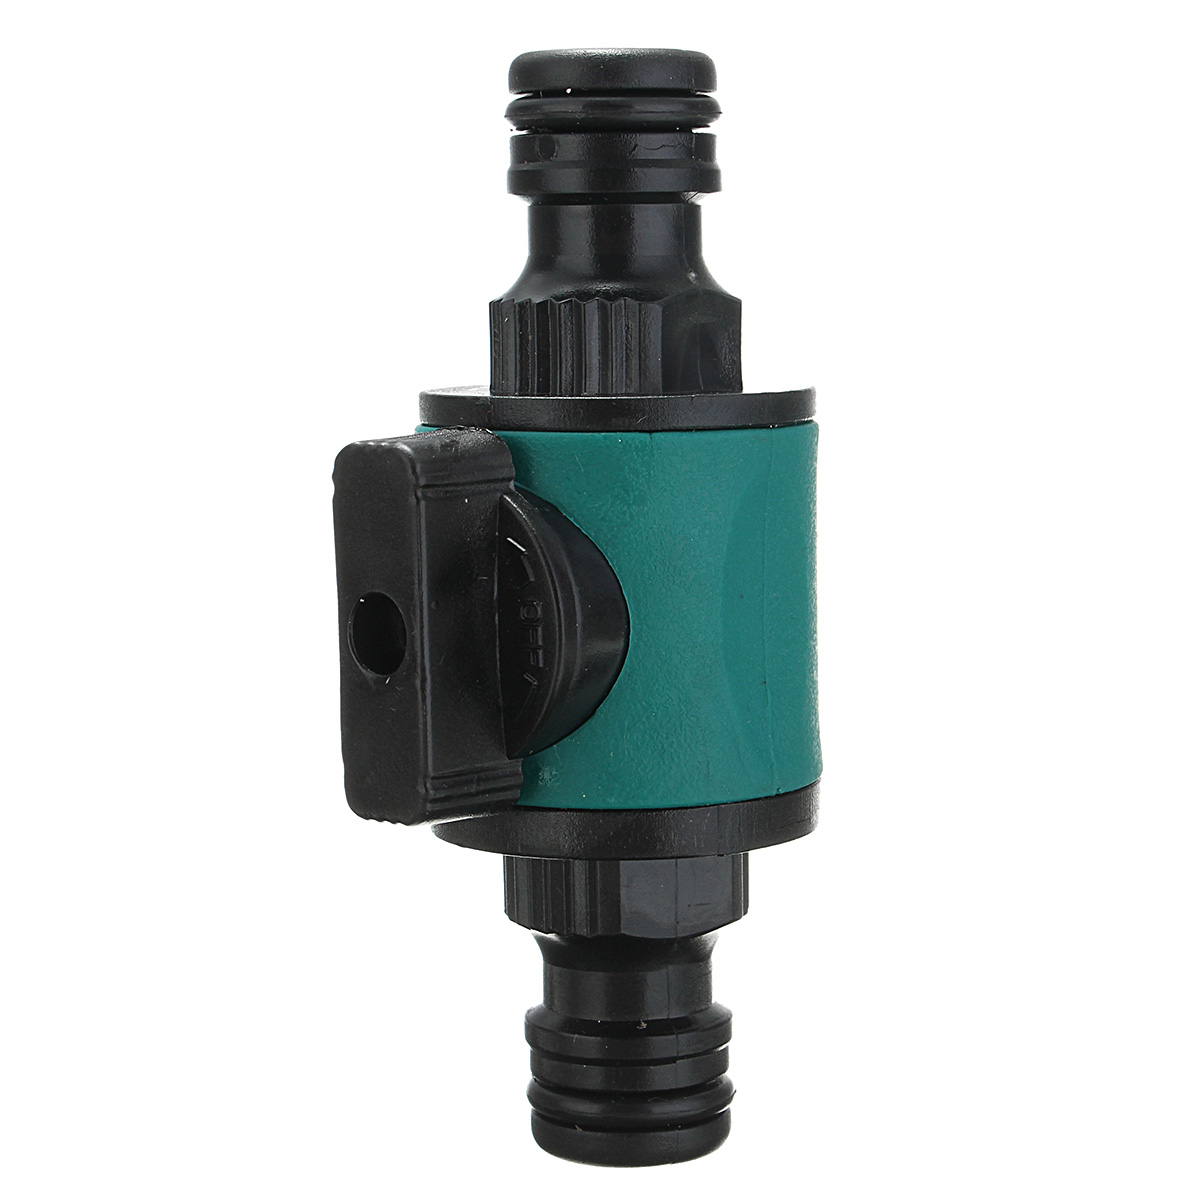 Garden-Hose-Tap-Pipe-Compatible-12-2-Way-Connector-Valve-Convertor-Fitting-Adapter-Tool-1290232